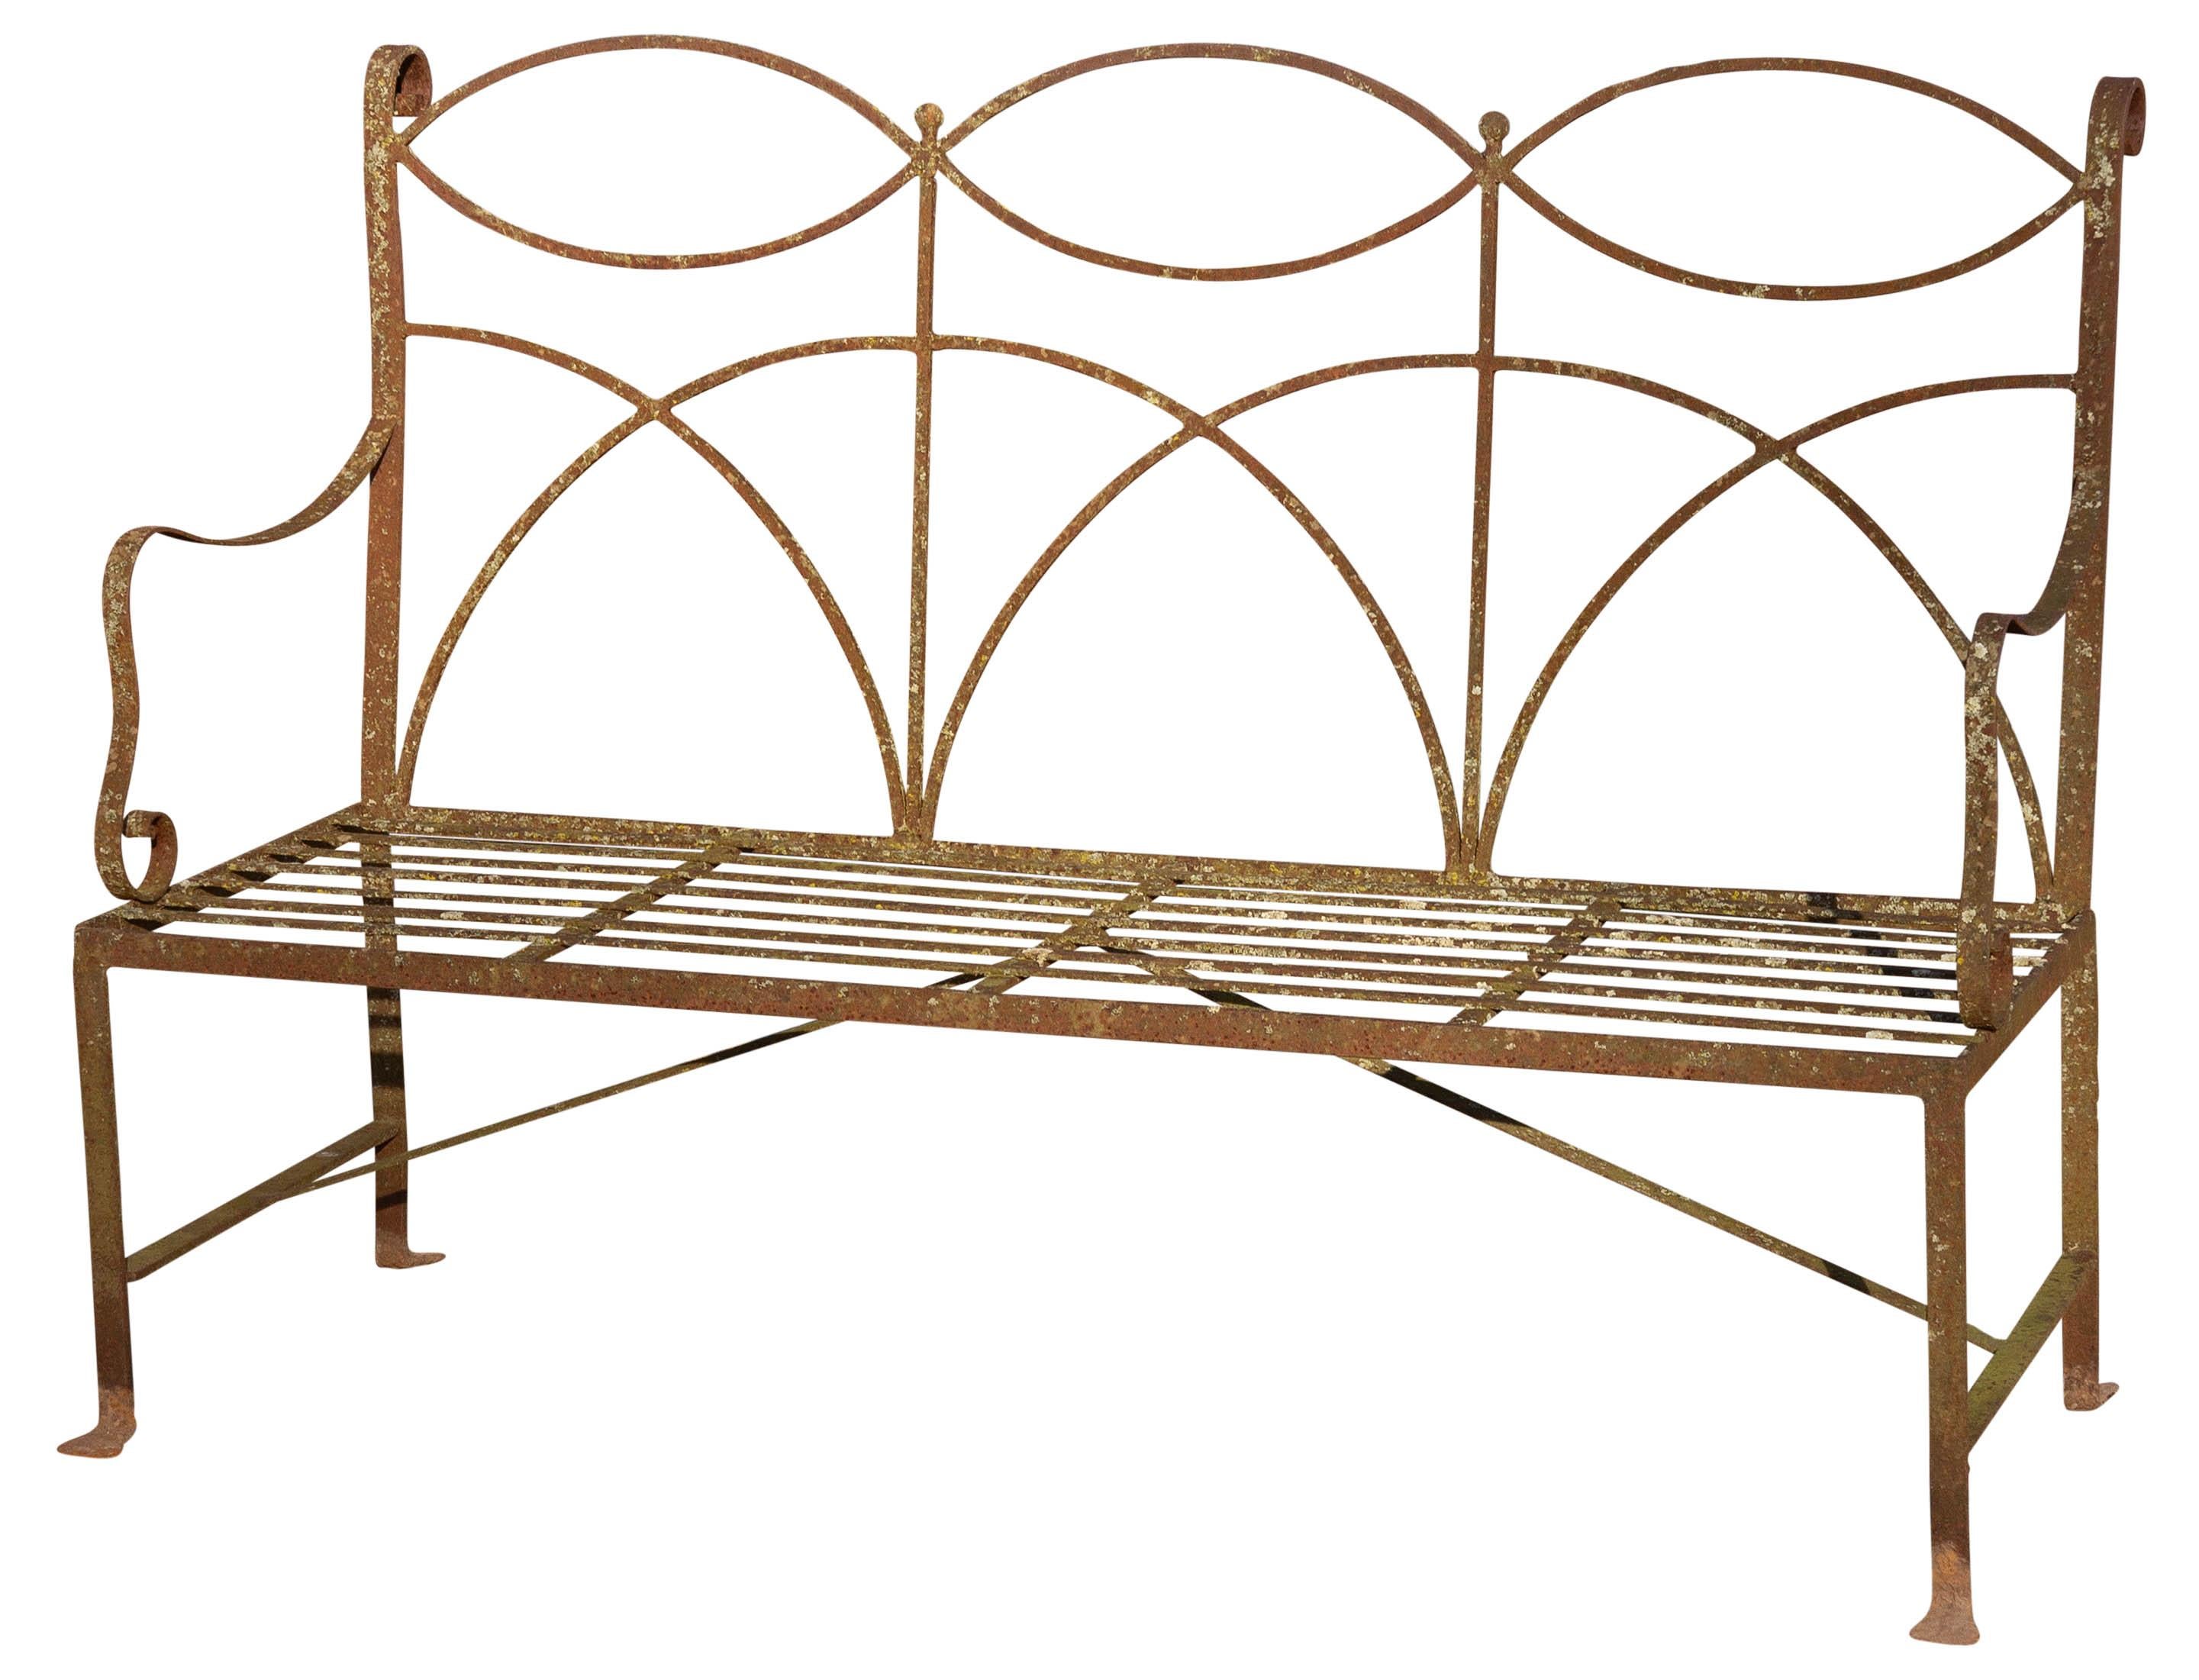 Hand-Crafted Neoclassical Wrought Iron Garden Bench Four-Seat